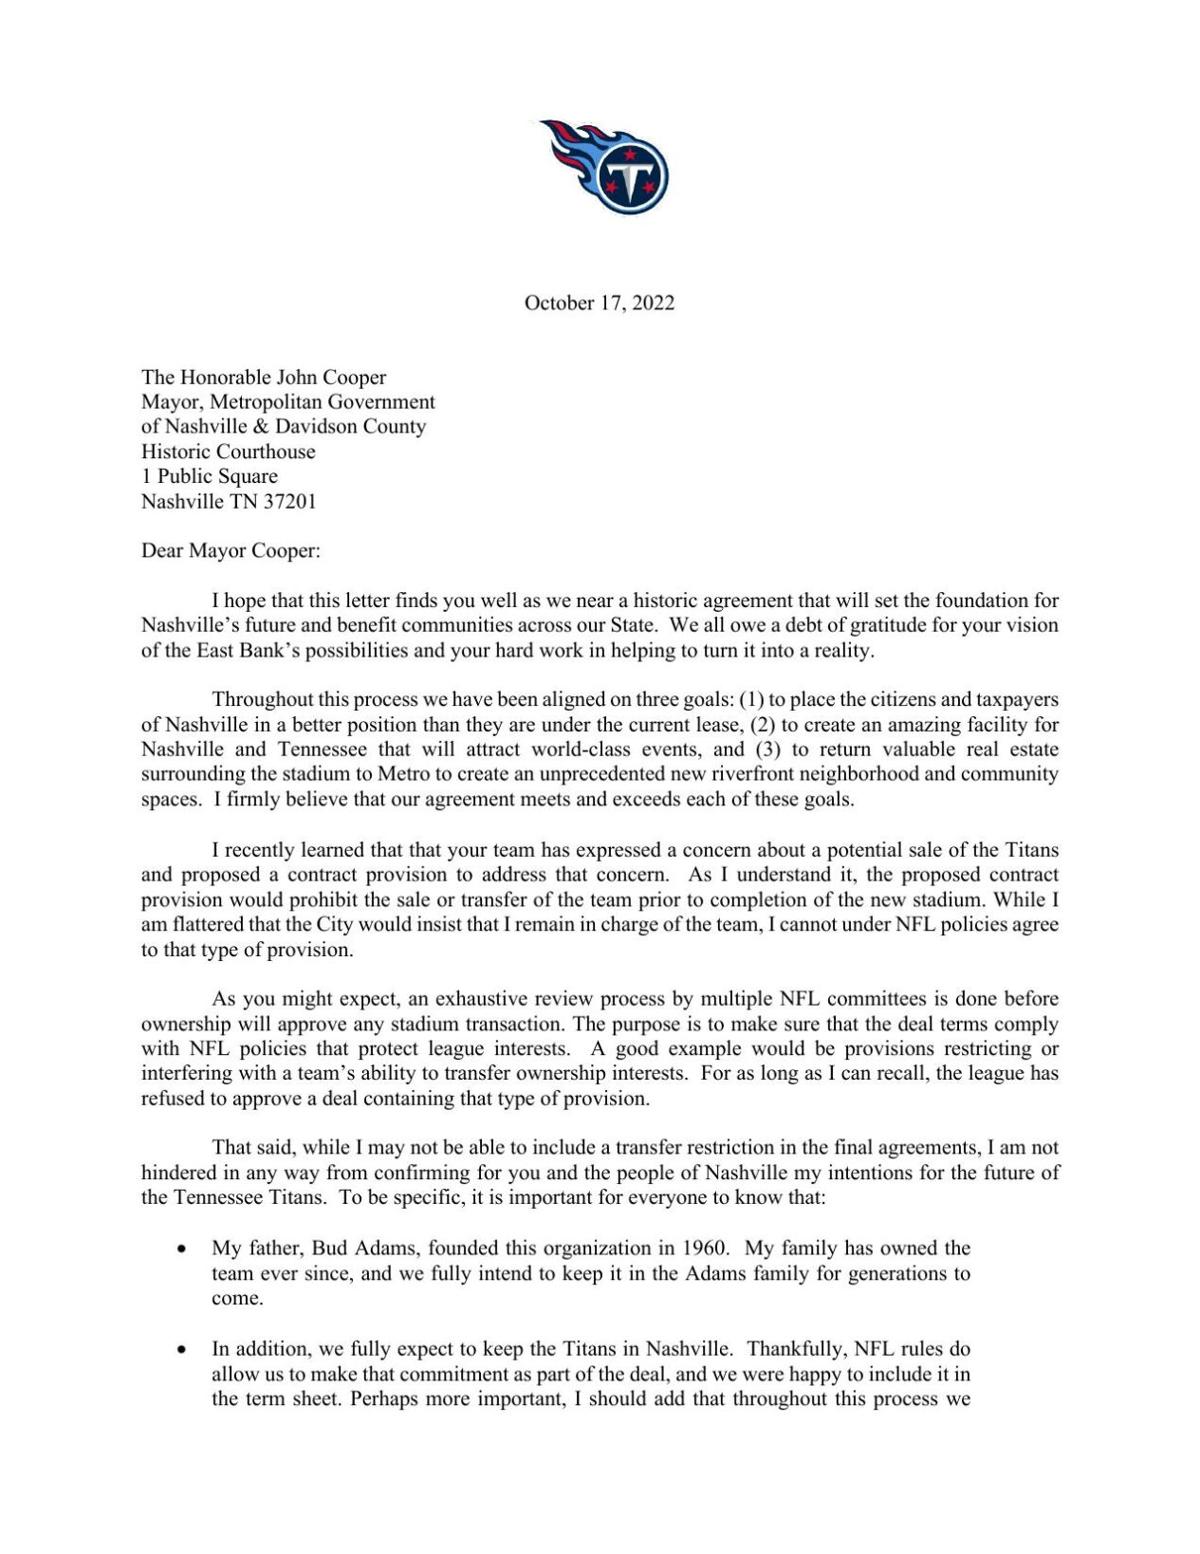 Letter to Cooper from Titans ownership